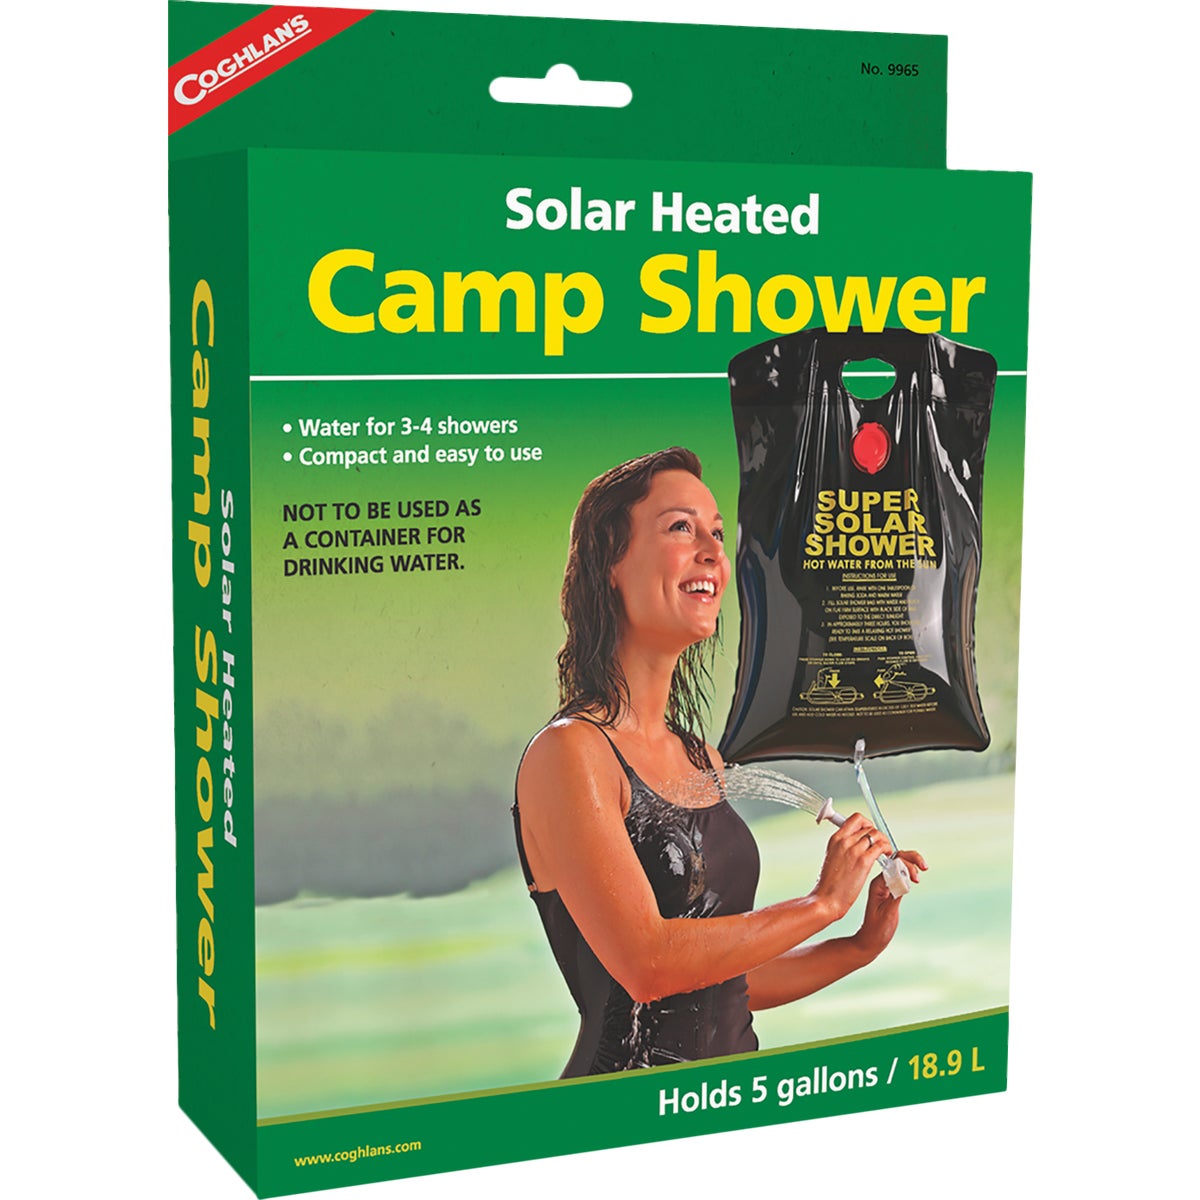 Item 847038, This easy-to-use, lightweight solar-heated shower stores enough water for 3